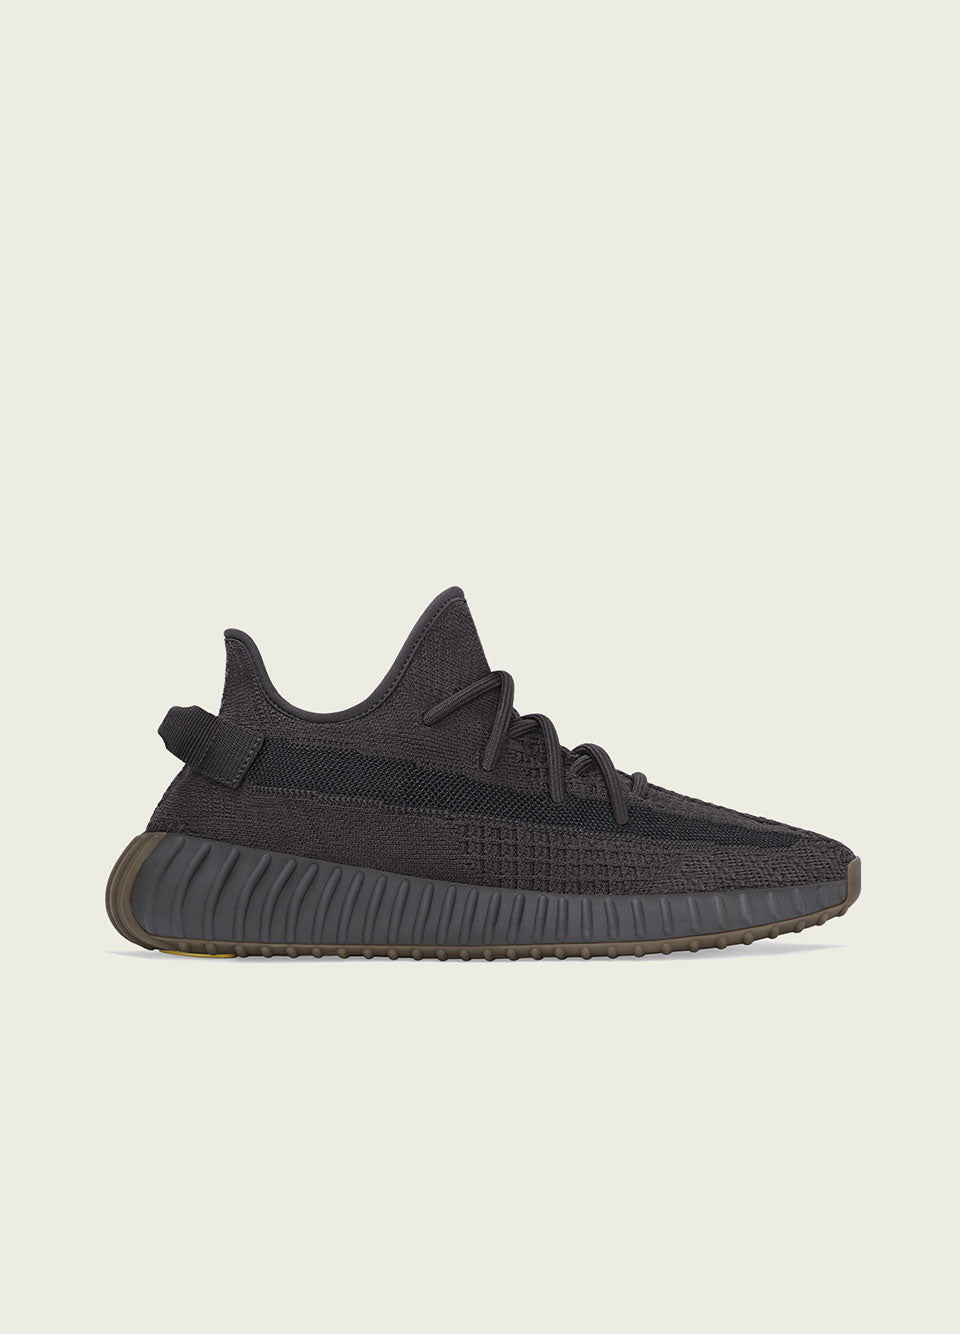 adidas Yeezy Boost 350 V2 Cinder --launch-date--2020-03-21